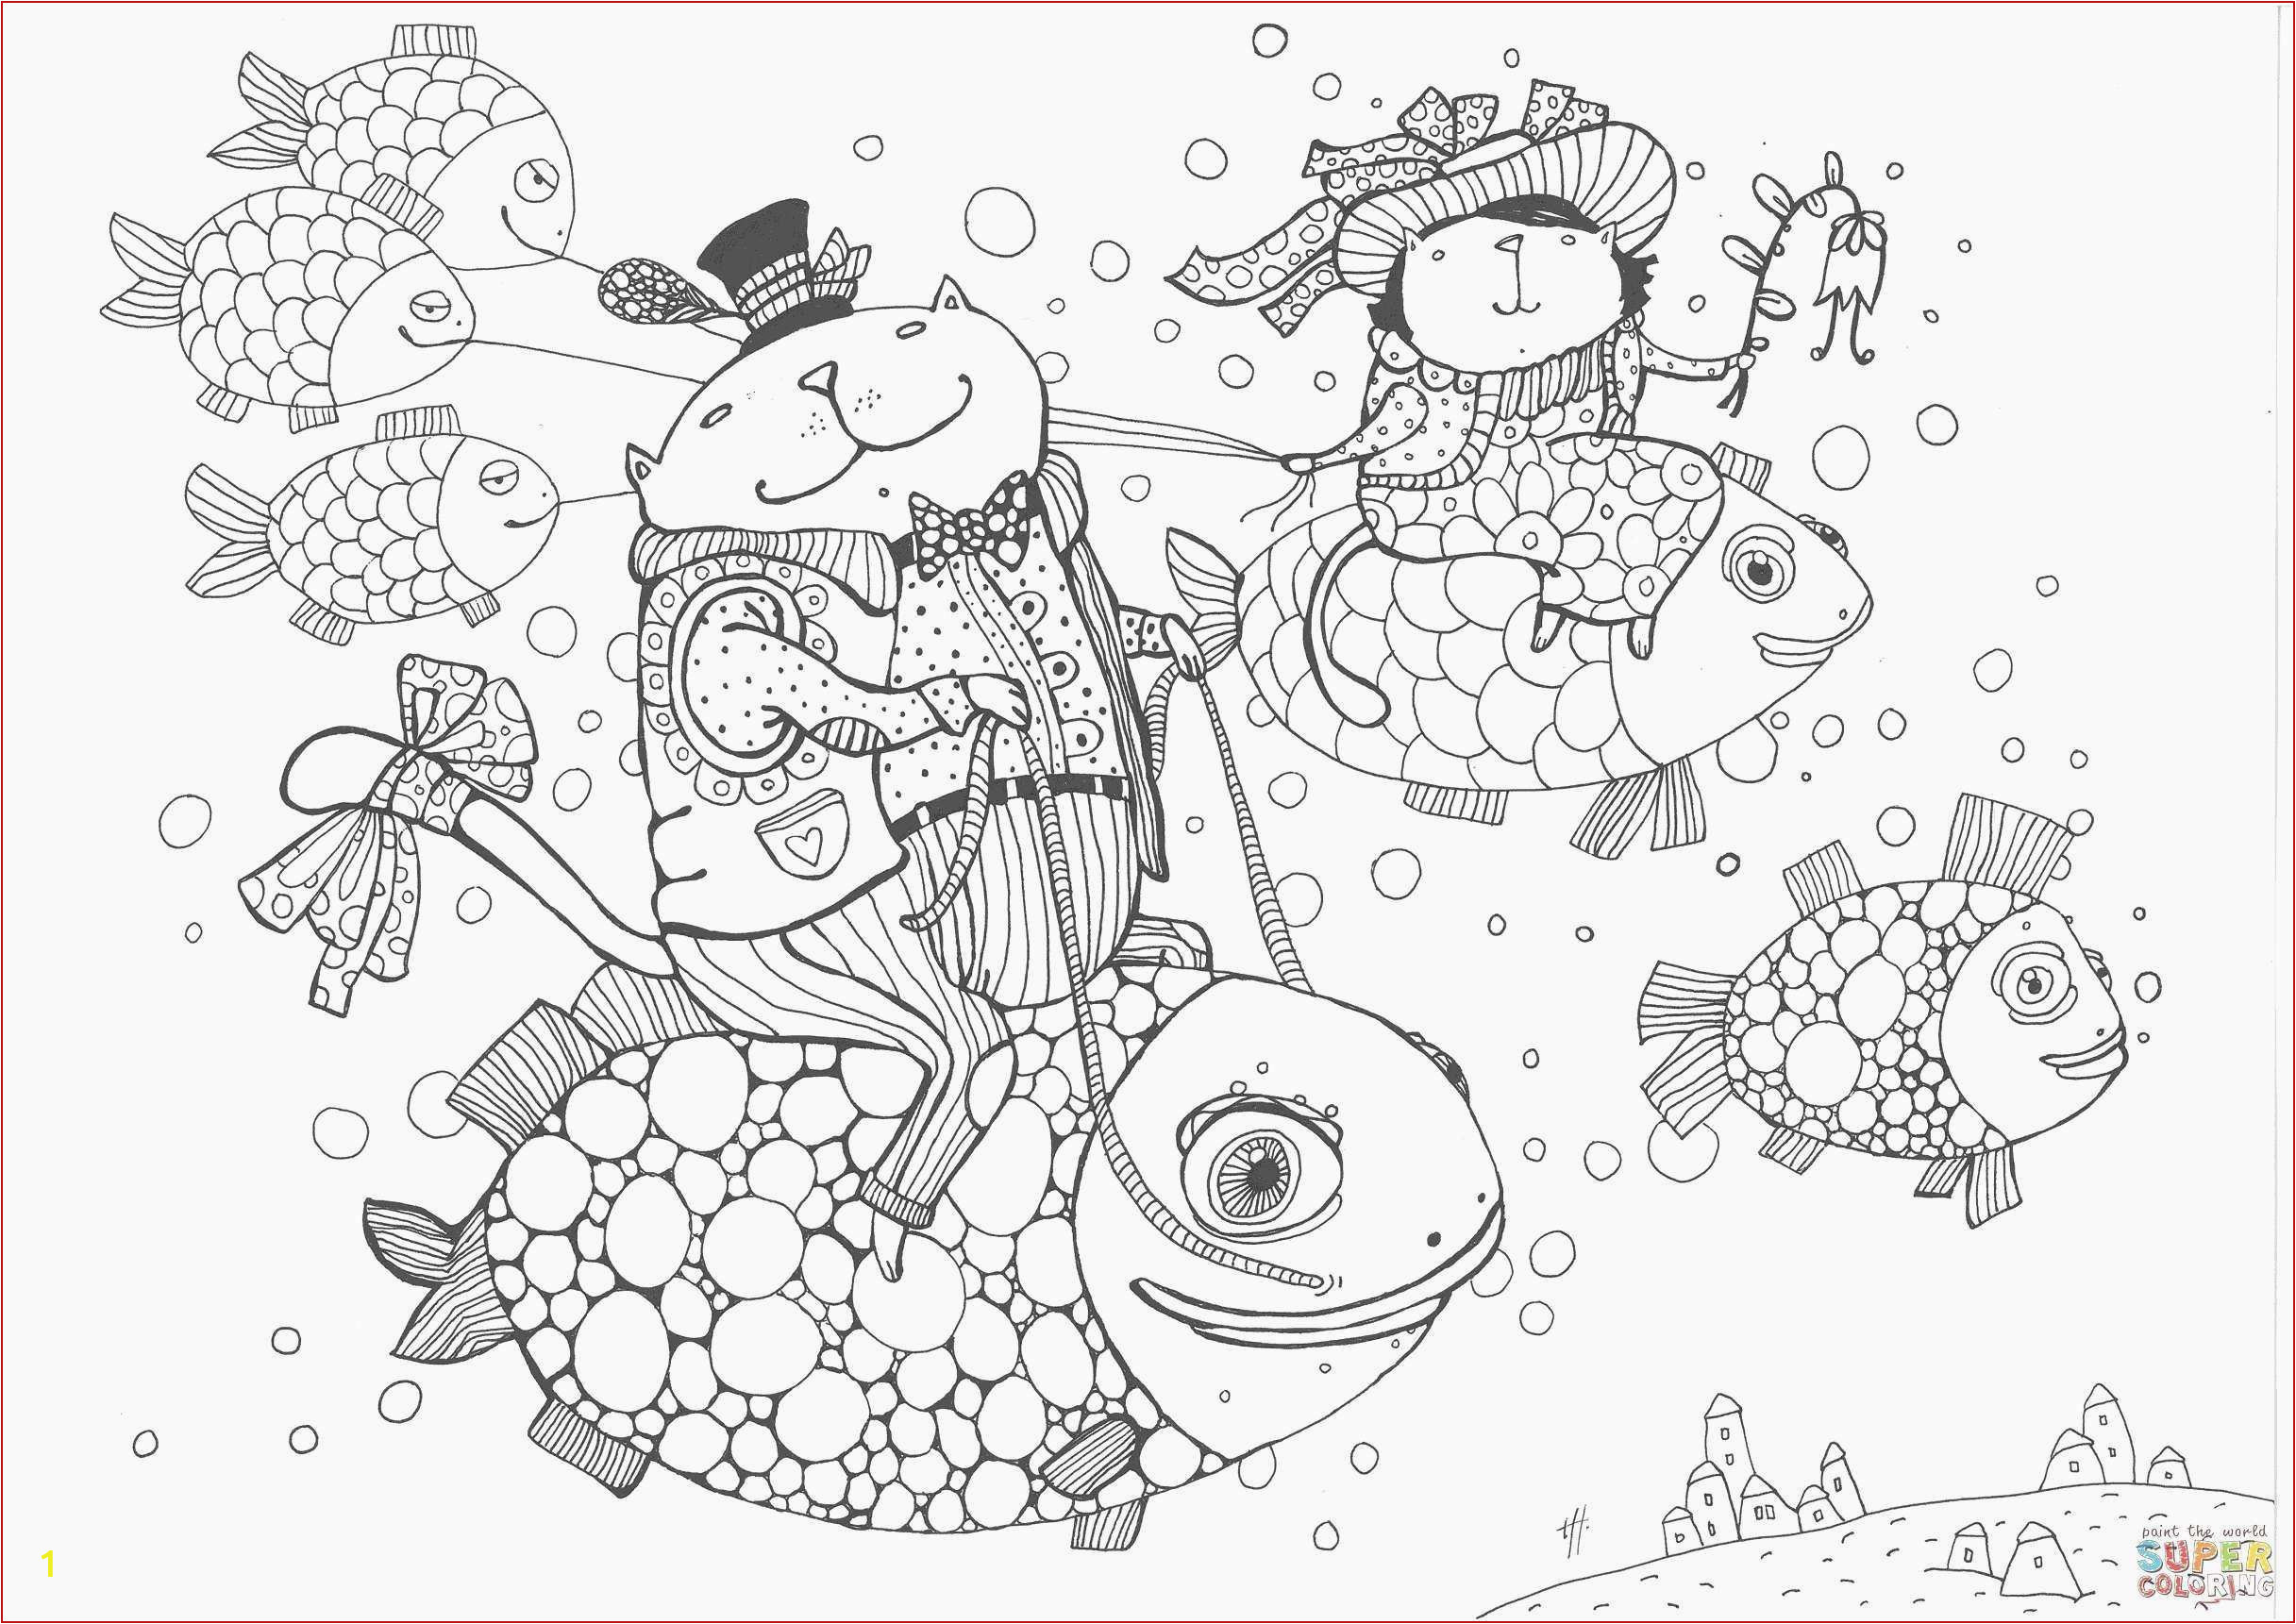 Coloring Pages for Kids Frozen top 54 Splendid Frozen Full Coloring Pages Inspirational